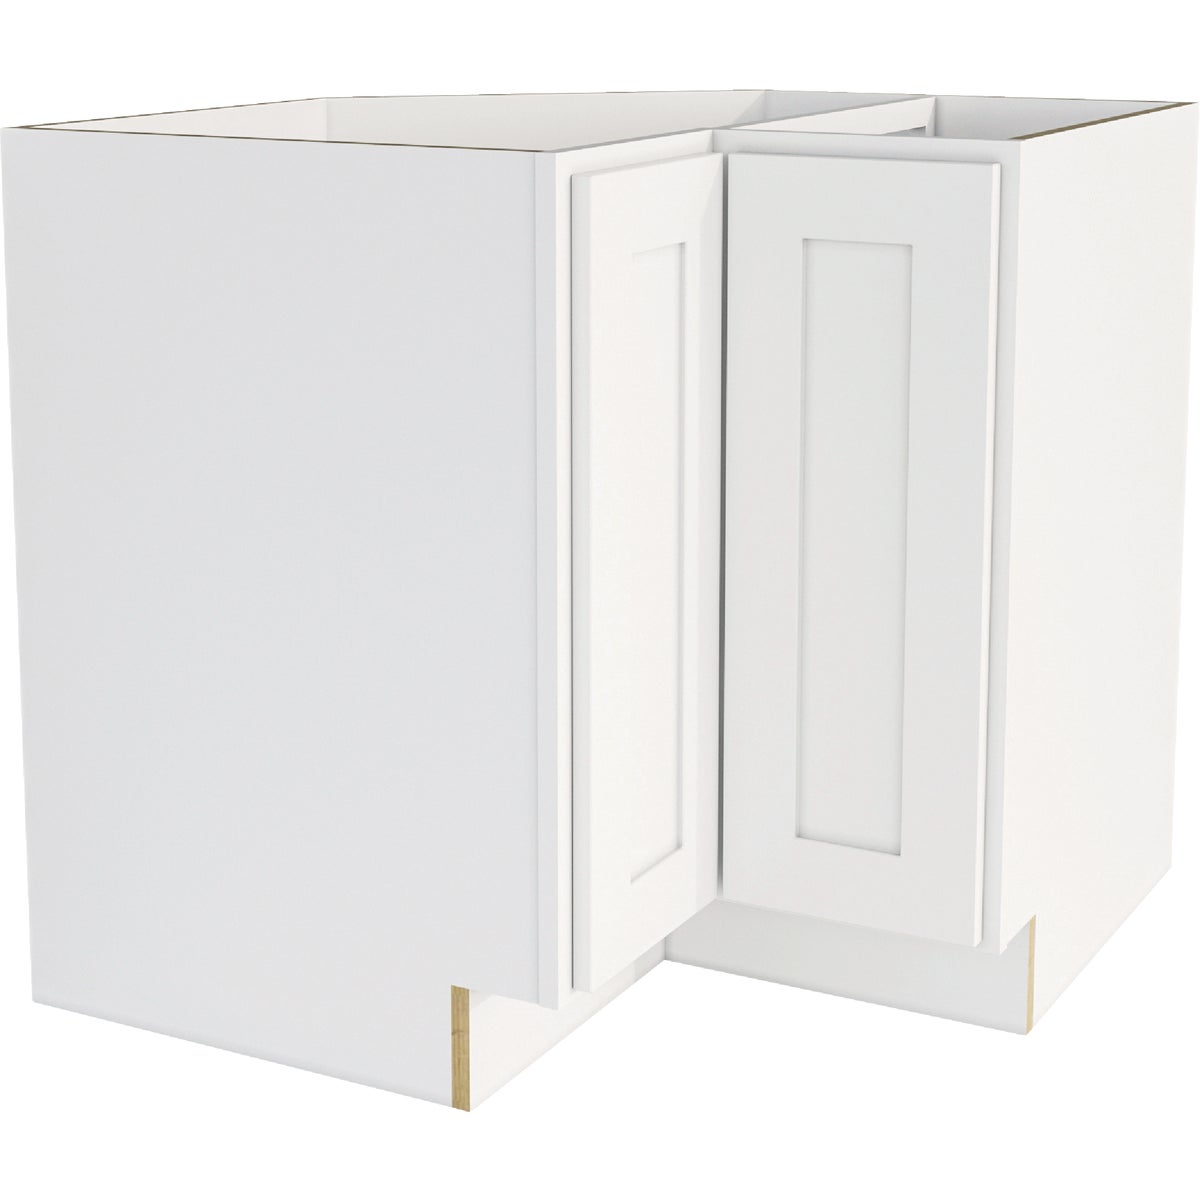 CraftMark Plymouth Shaker 36 In. W x 24 In. D x 34. 5 In H Ready To Assemble White Corner Base Kitchen Cabinet